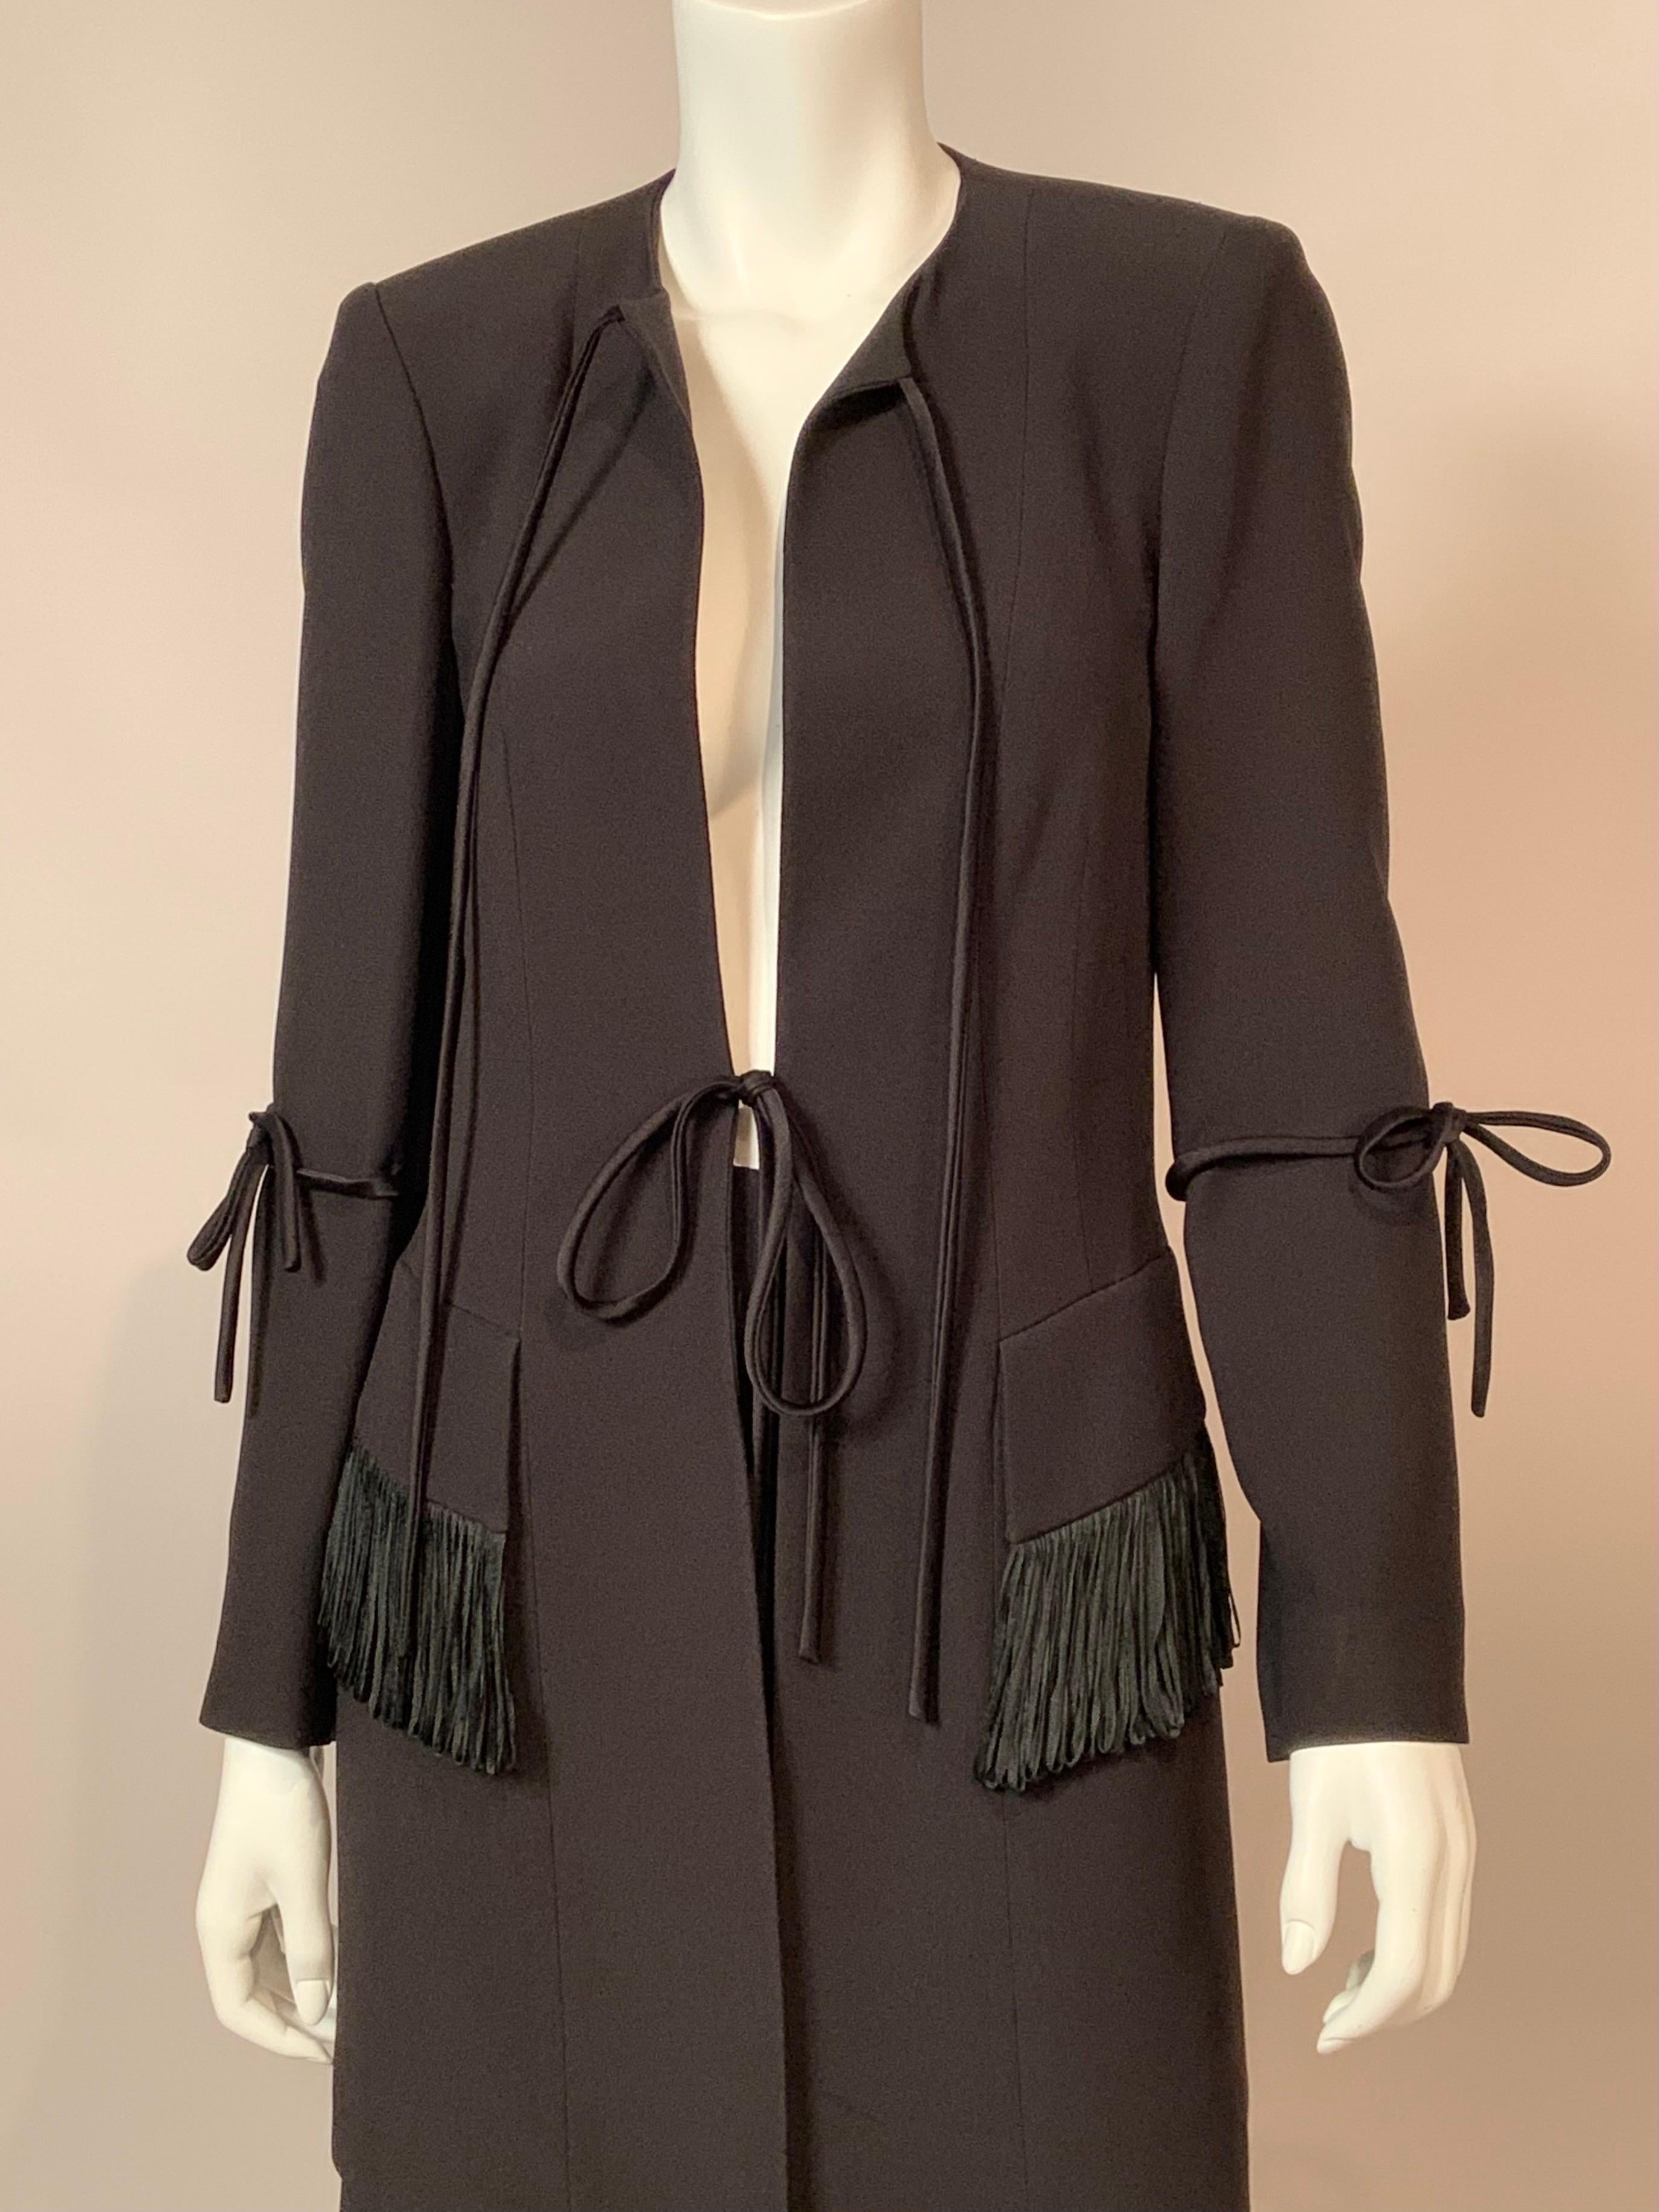 Karl Lagerfeld designed this stunning black silk evening suit with a long jacket and skirt.  The jacket has two long black satin ties for closure, one at the neckline and one at the waist. There is looped satin fringe on both pocket flaps, and the